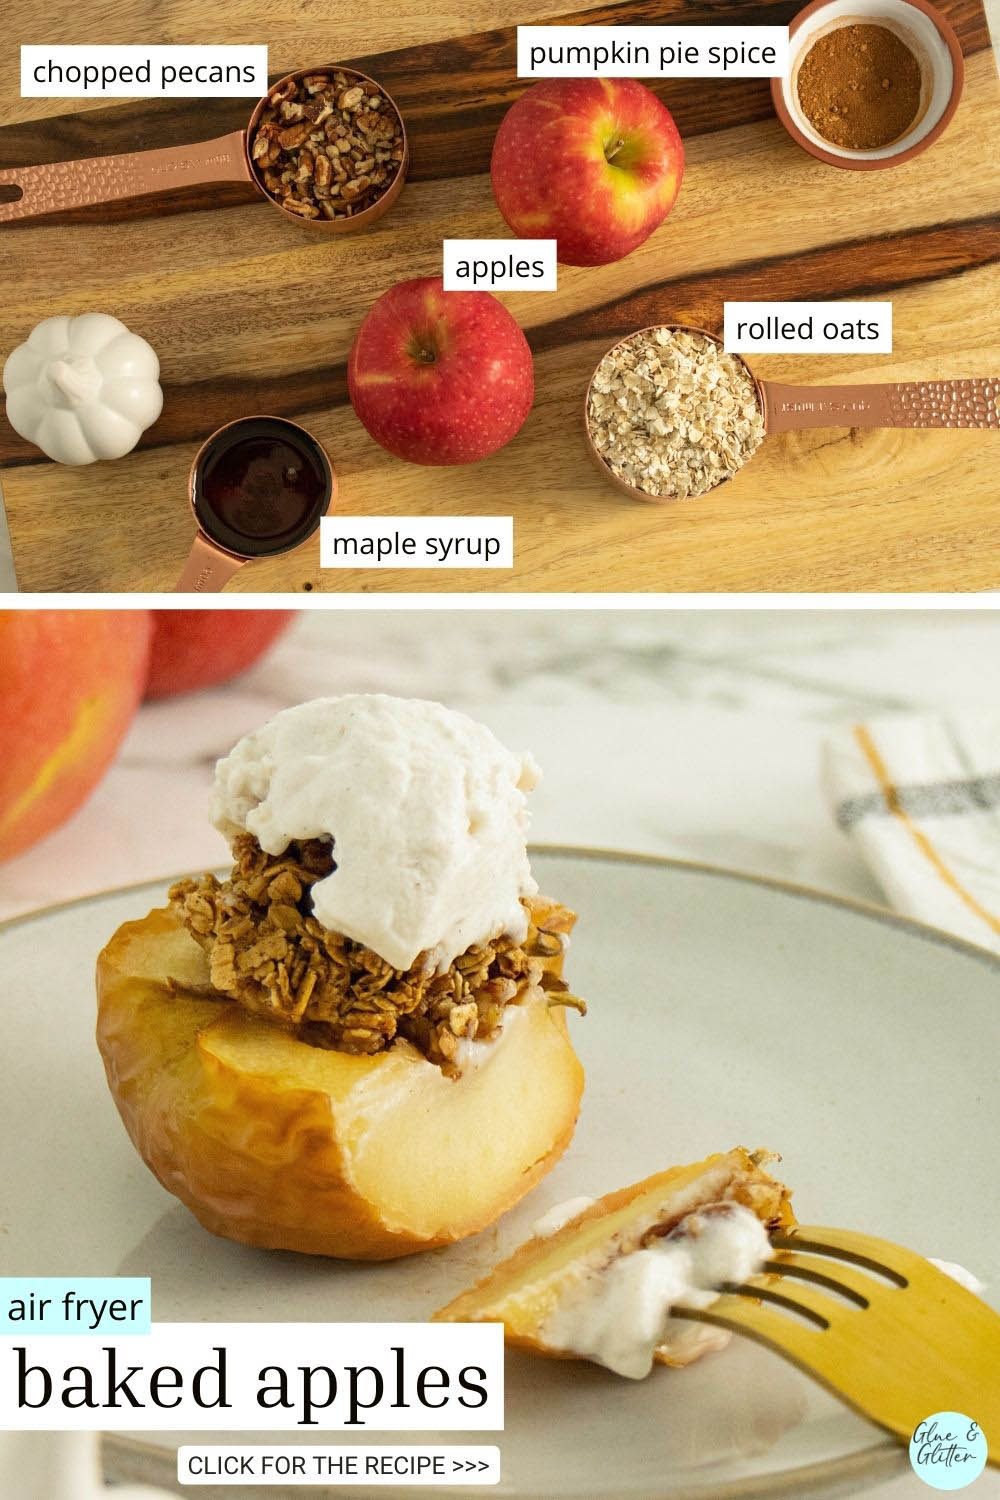 image collage of labeled baked apple ingredients and the finished air fryer baked apple on a plate with ice cream